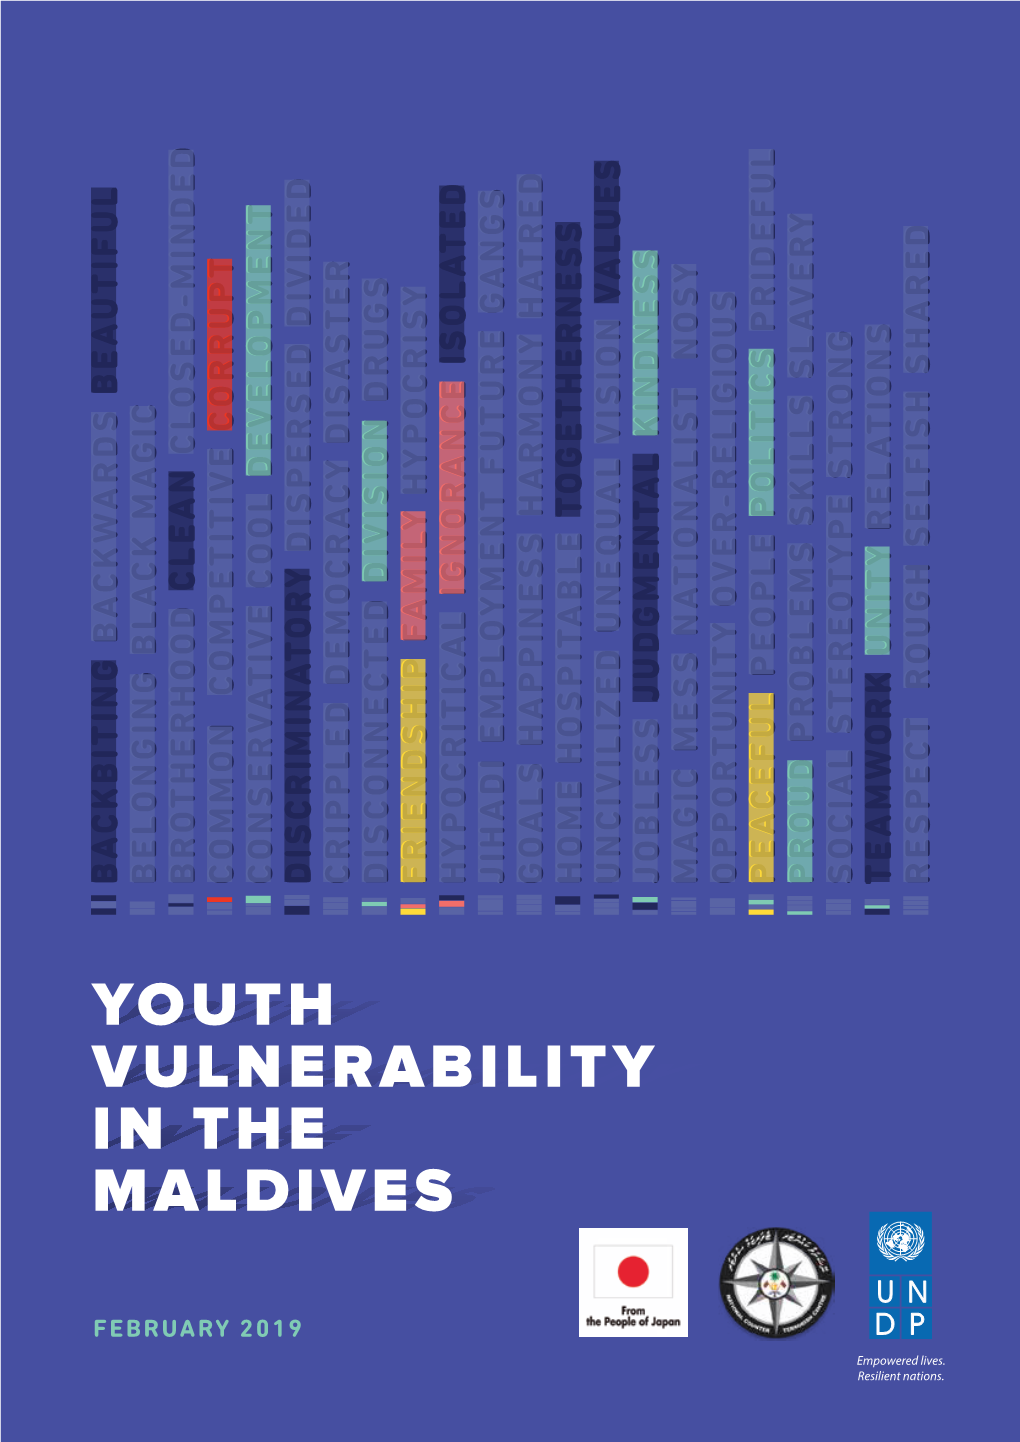 Report, ”Youth Vulnerability in Maldives.”